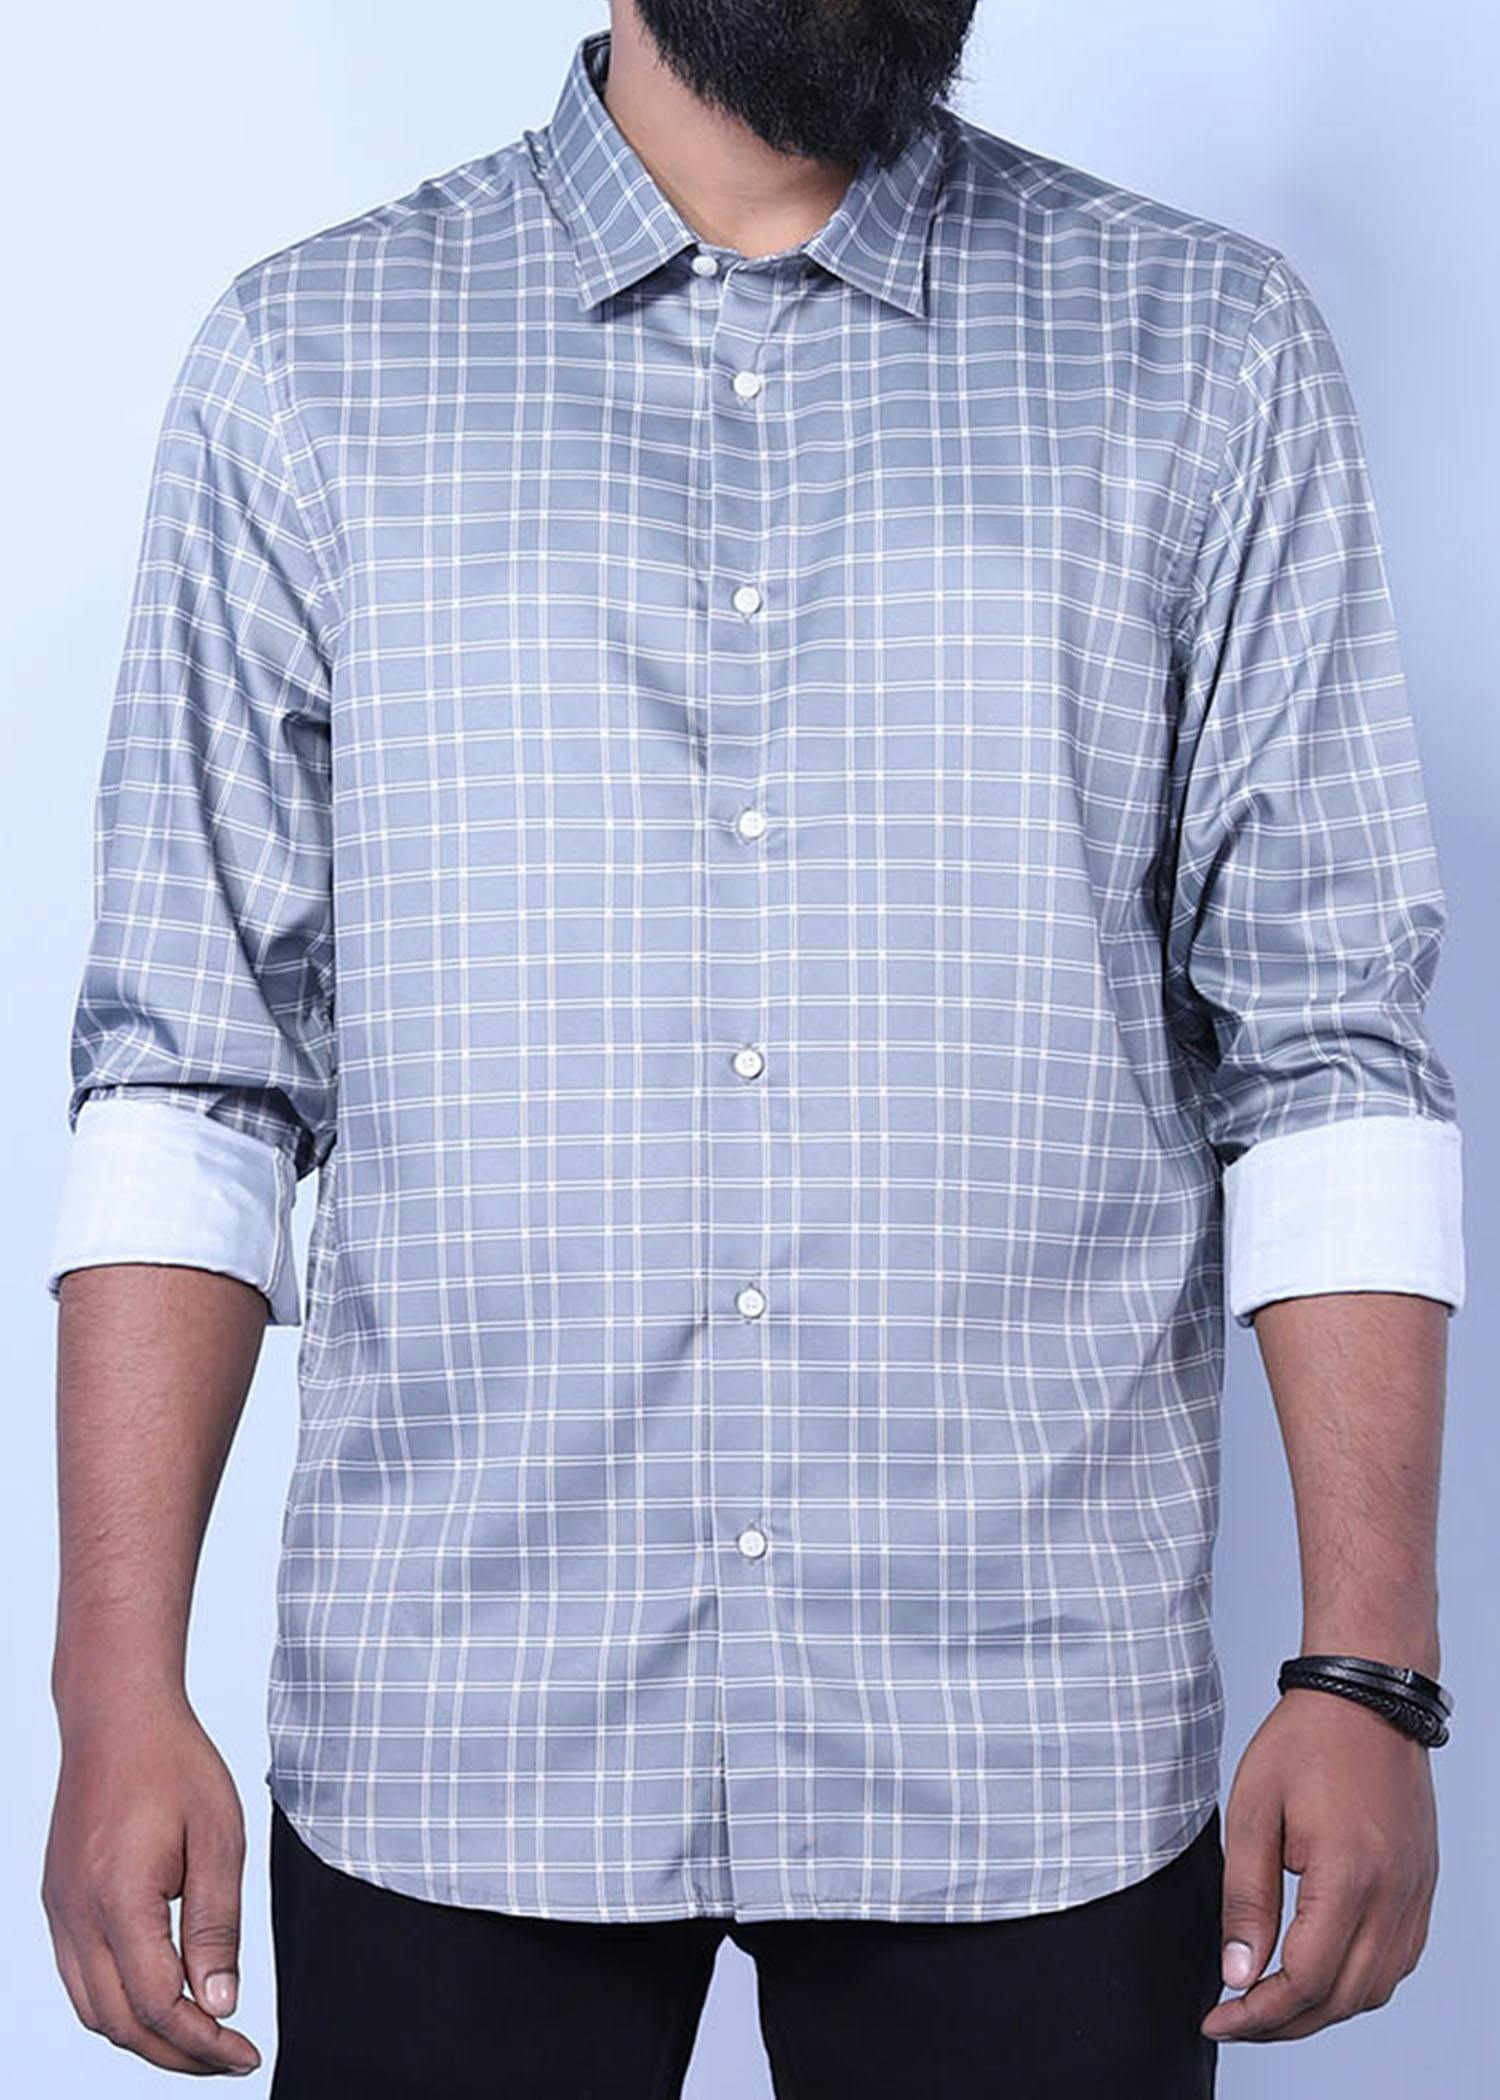 istanbul xii shirt grey color full facecropped